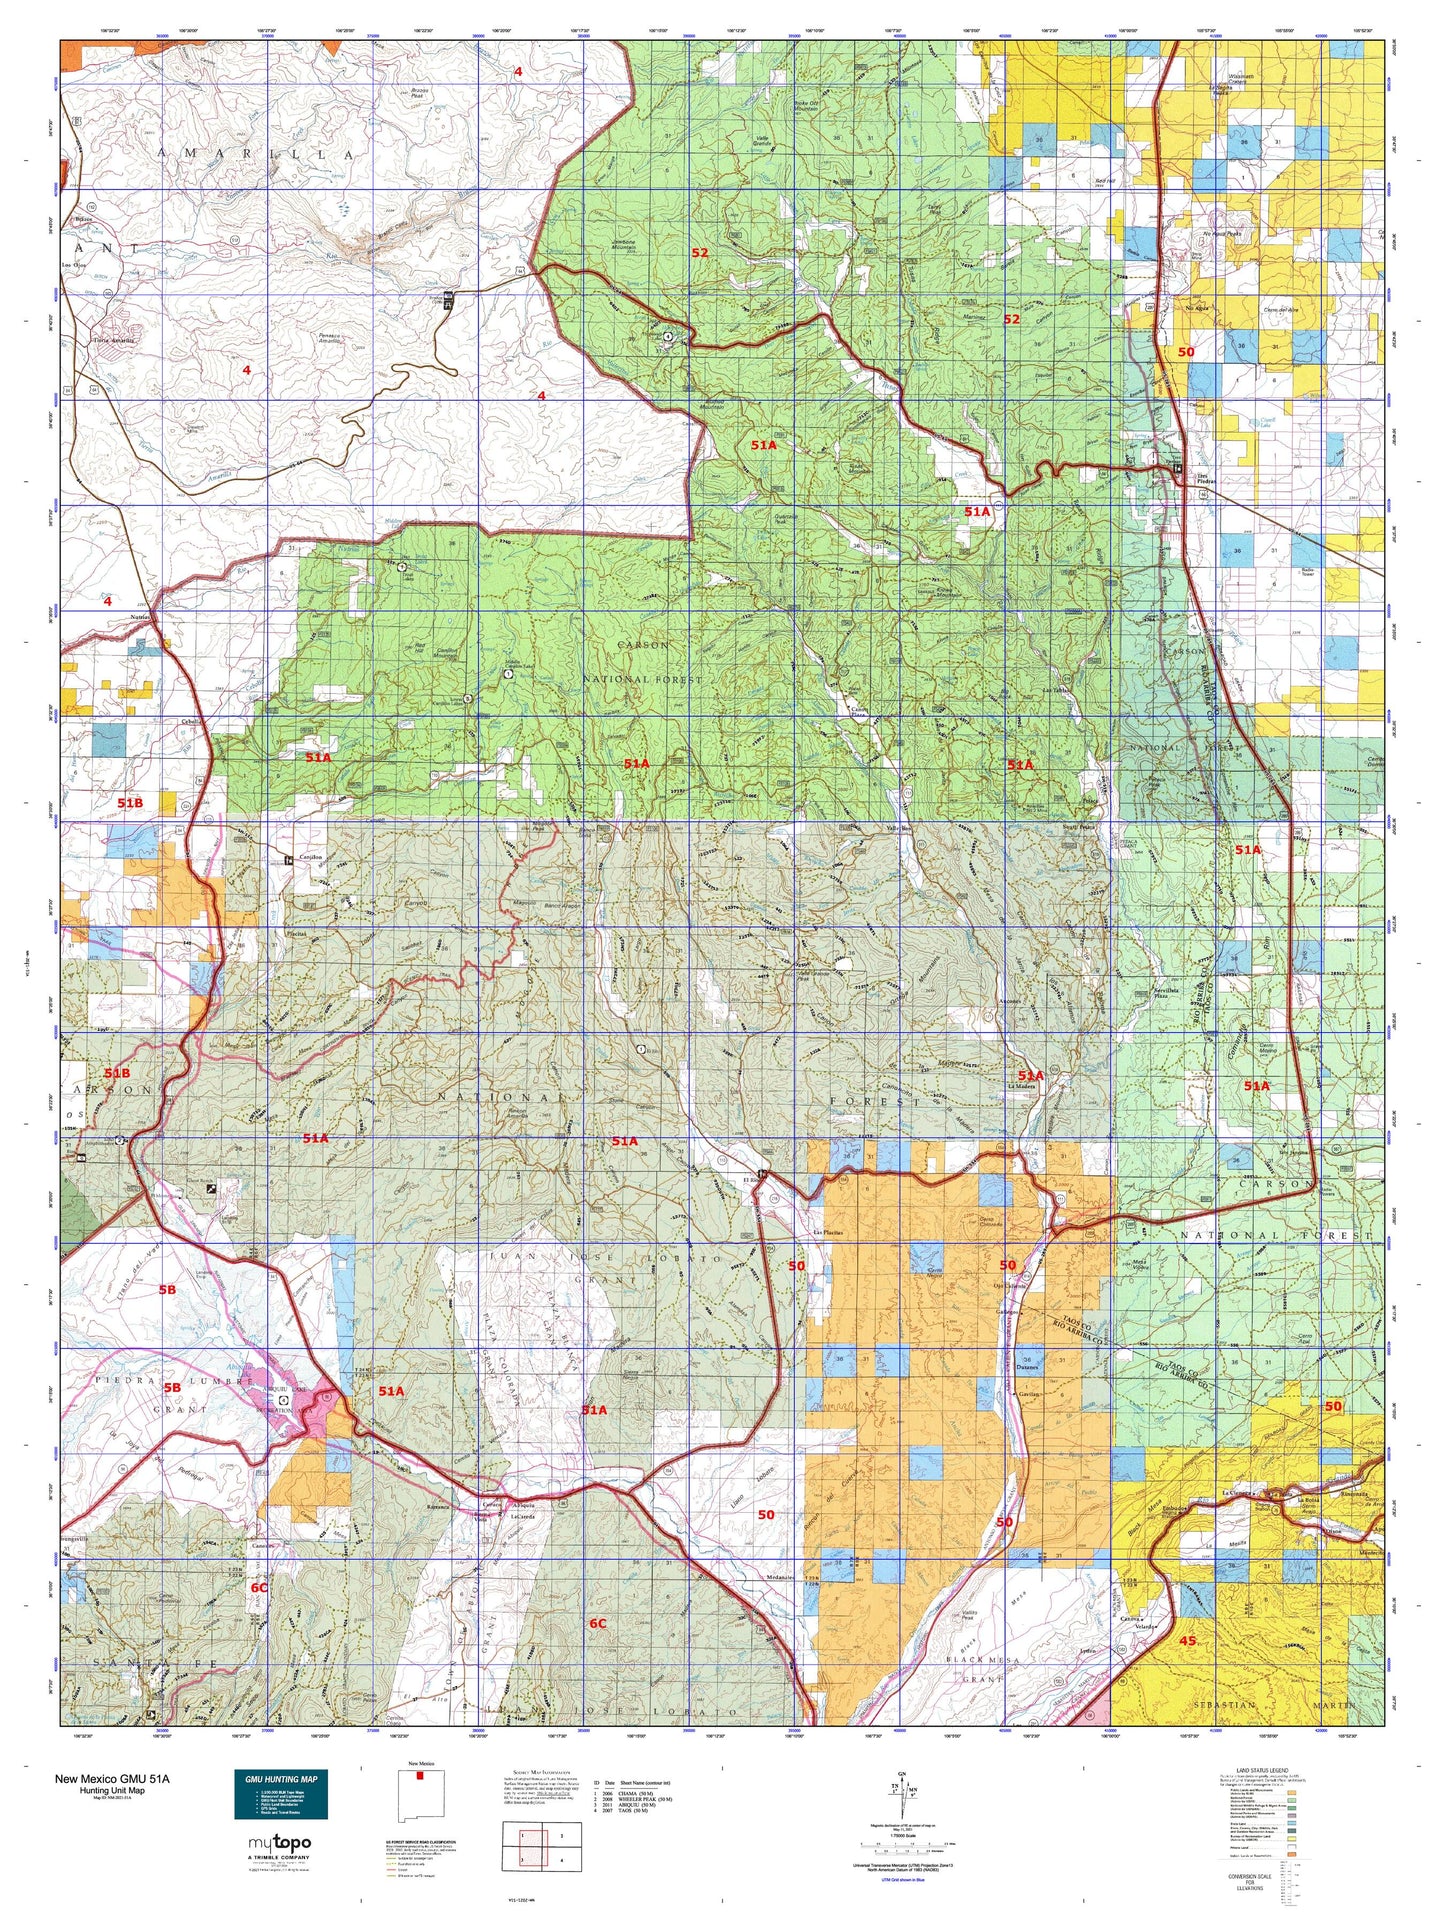 New Mexico GMU 51A Map Image